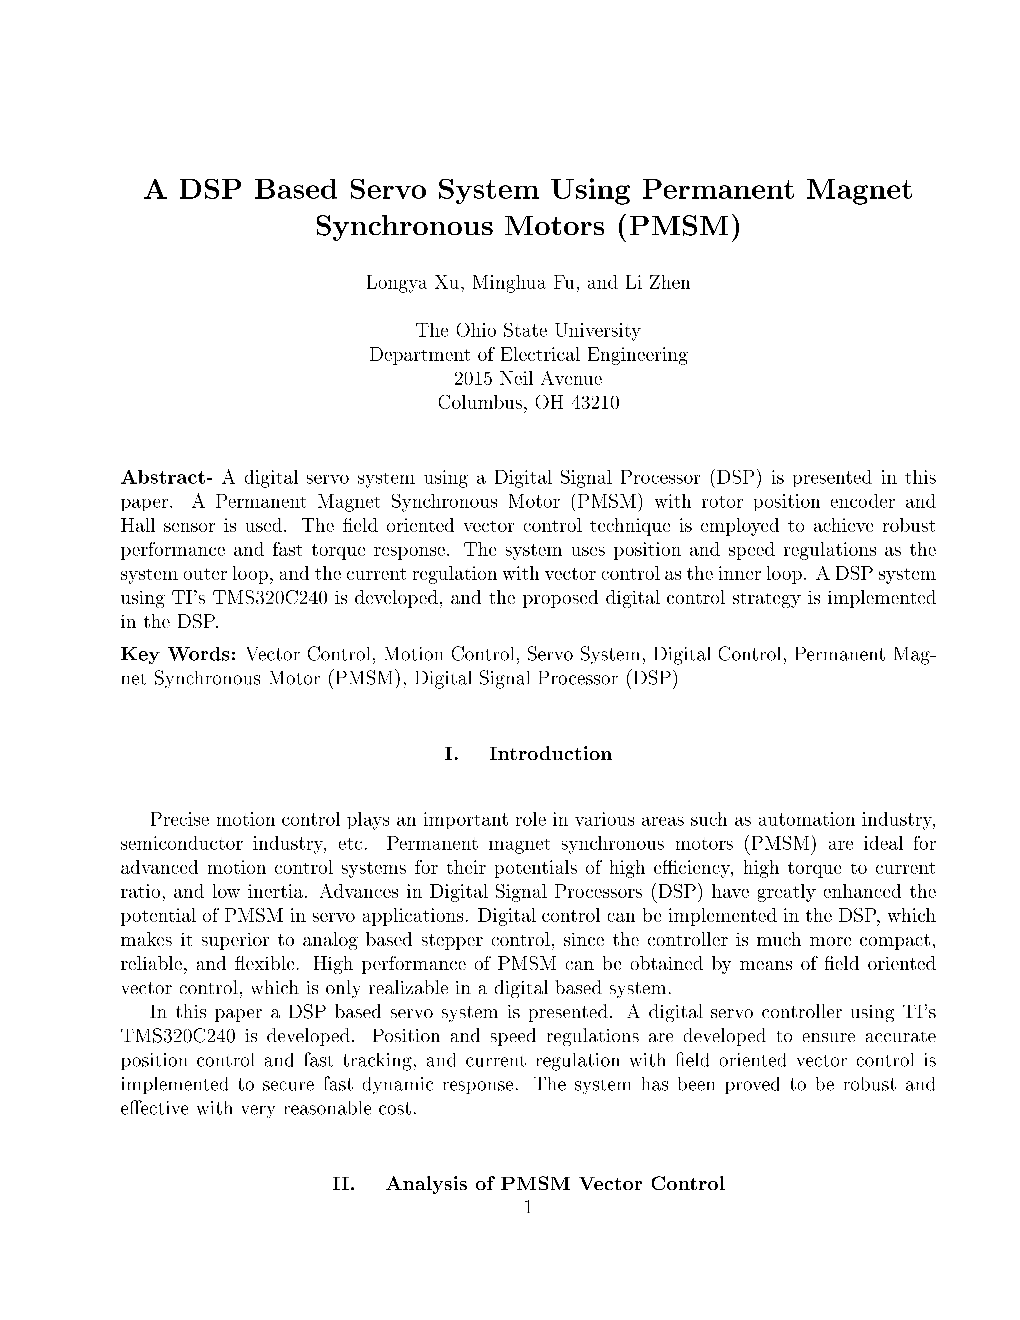 A DSP Based Servo System Using Permanent Magnet Synchronous